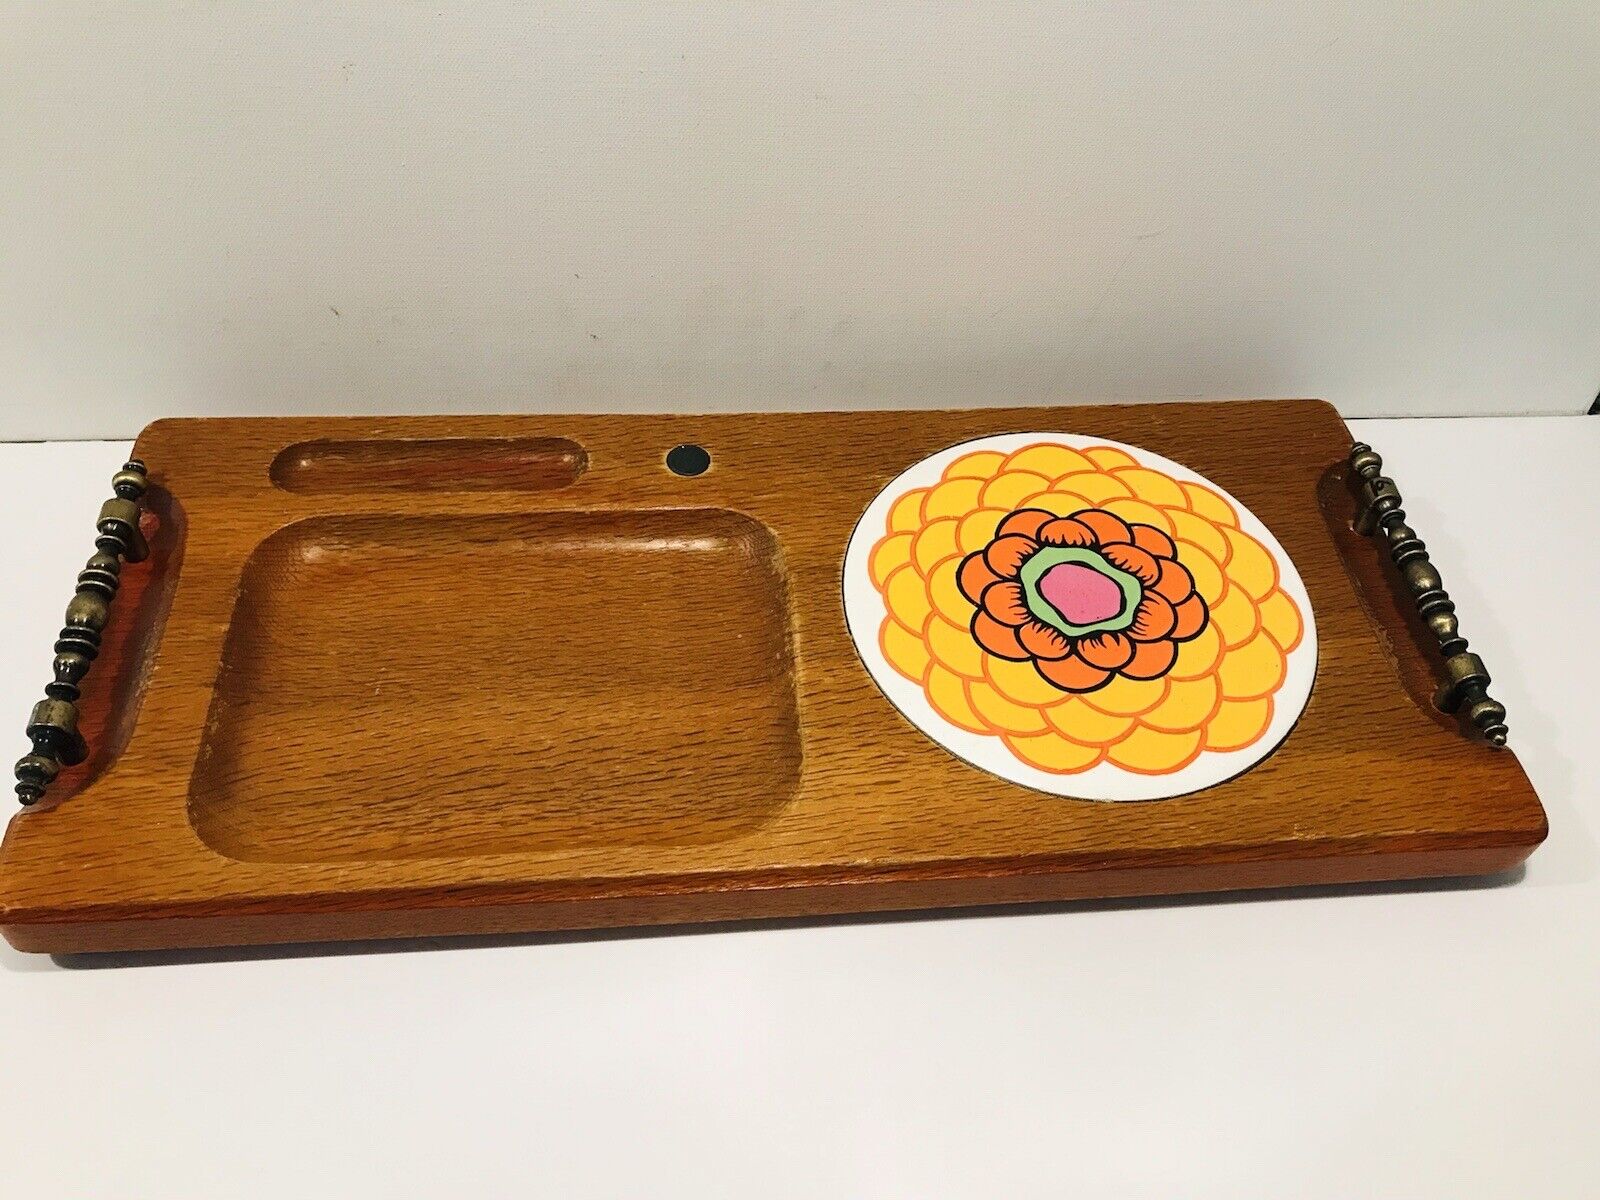 Vintage Wooden Cheese Board Serving Tray with Floral Tile Trivet 1970’s Japan